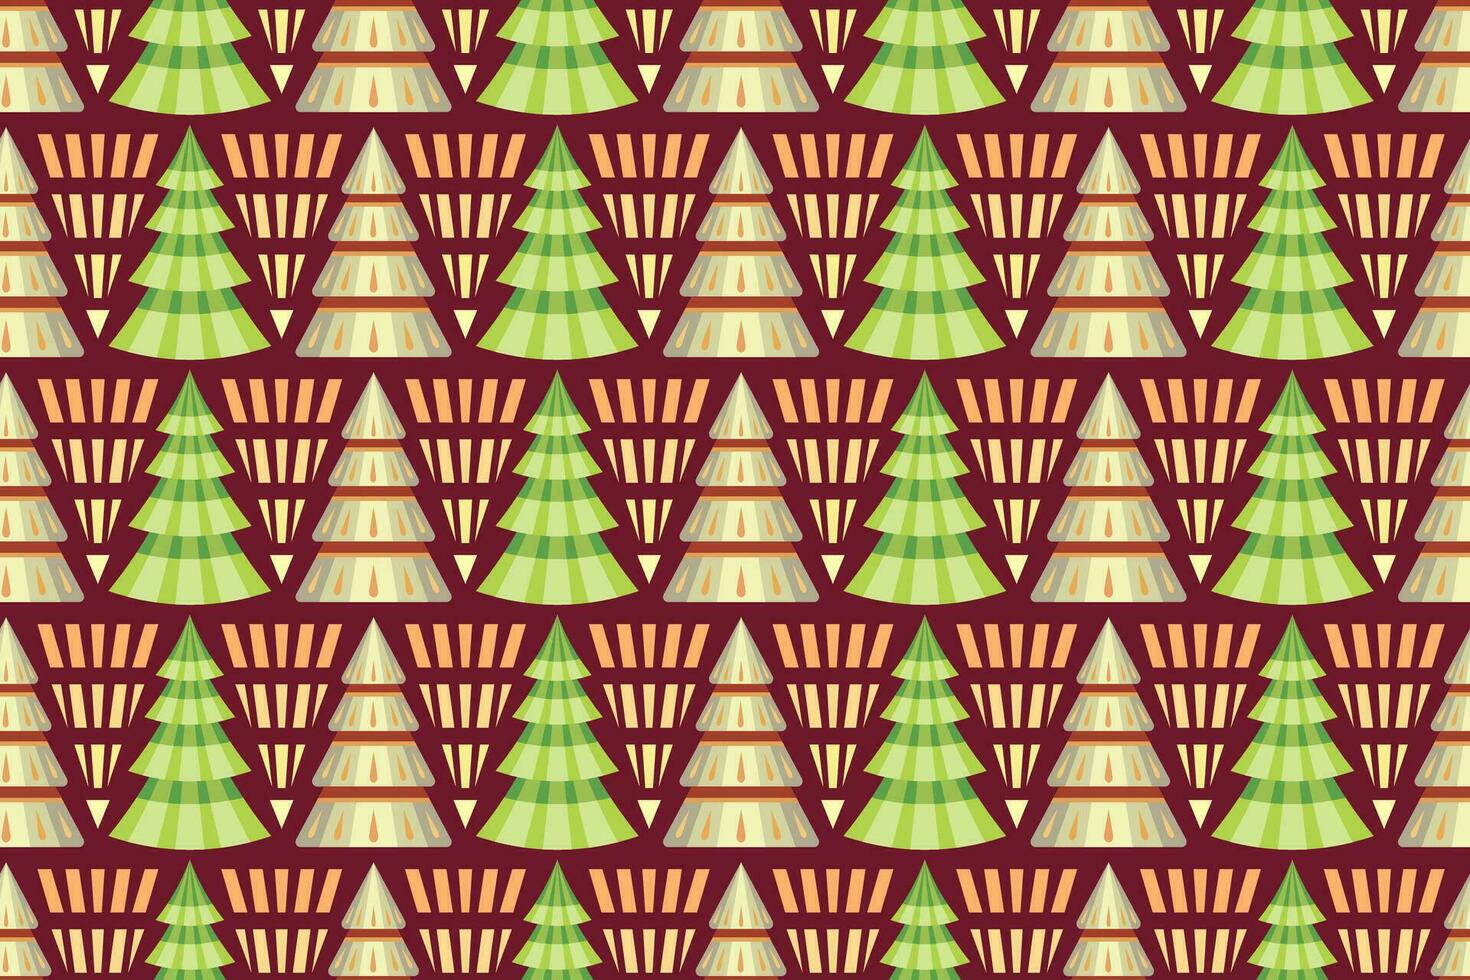 Seamless pattern with Christmas trees, endless repeating New Year event colorful pattern with decorative, stylized Christmas trees. vector